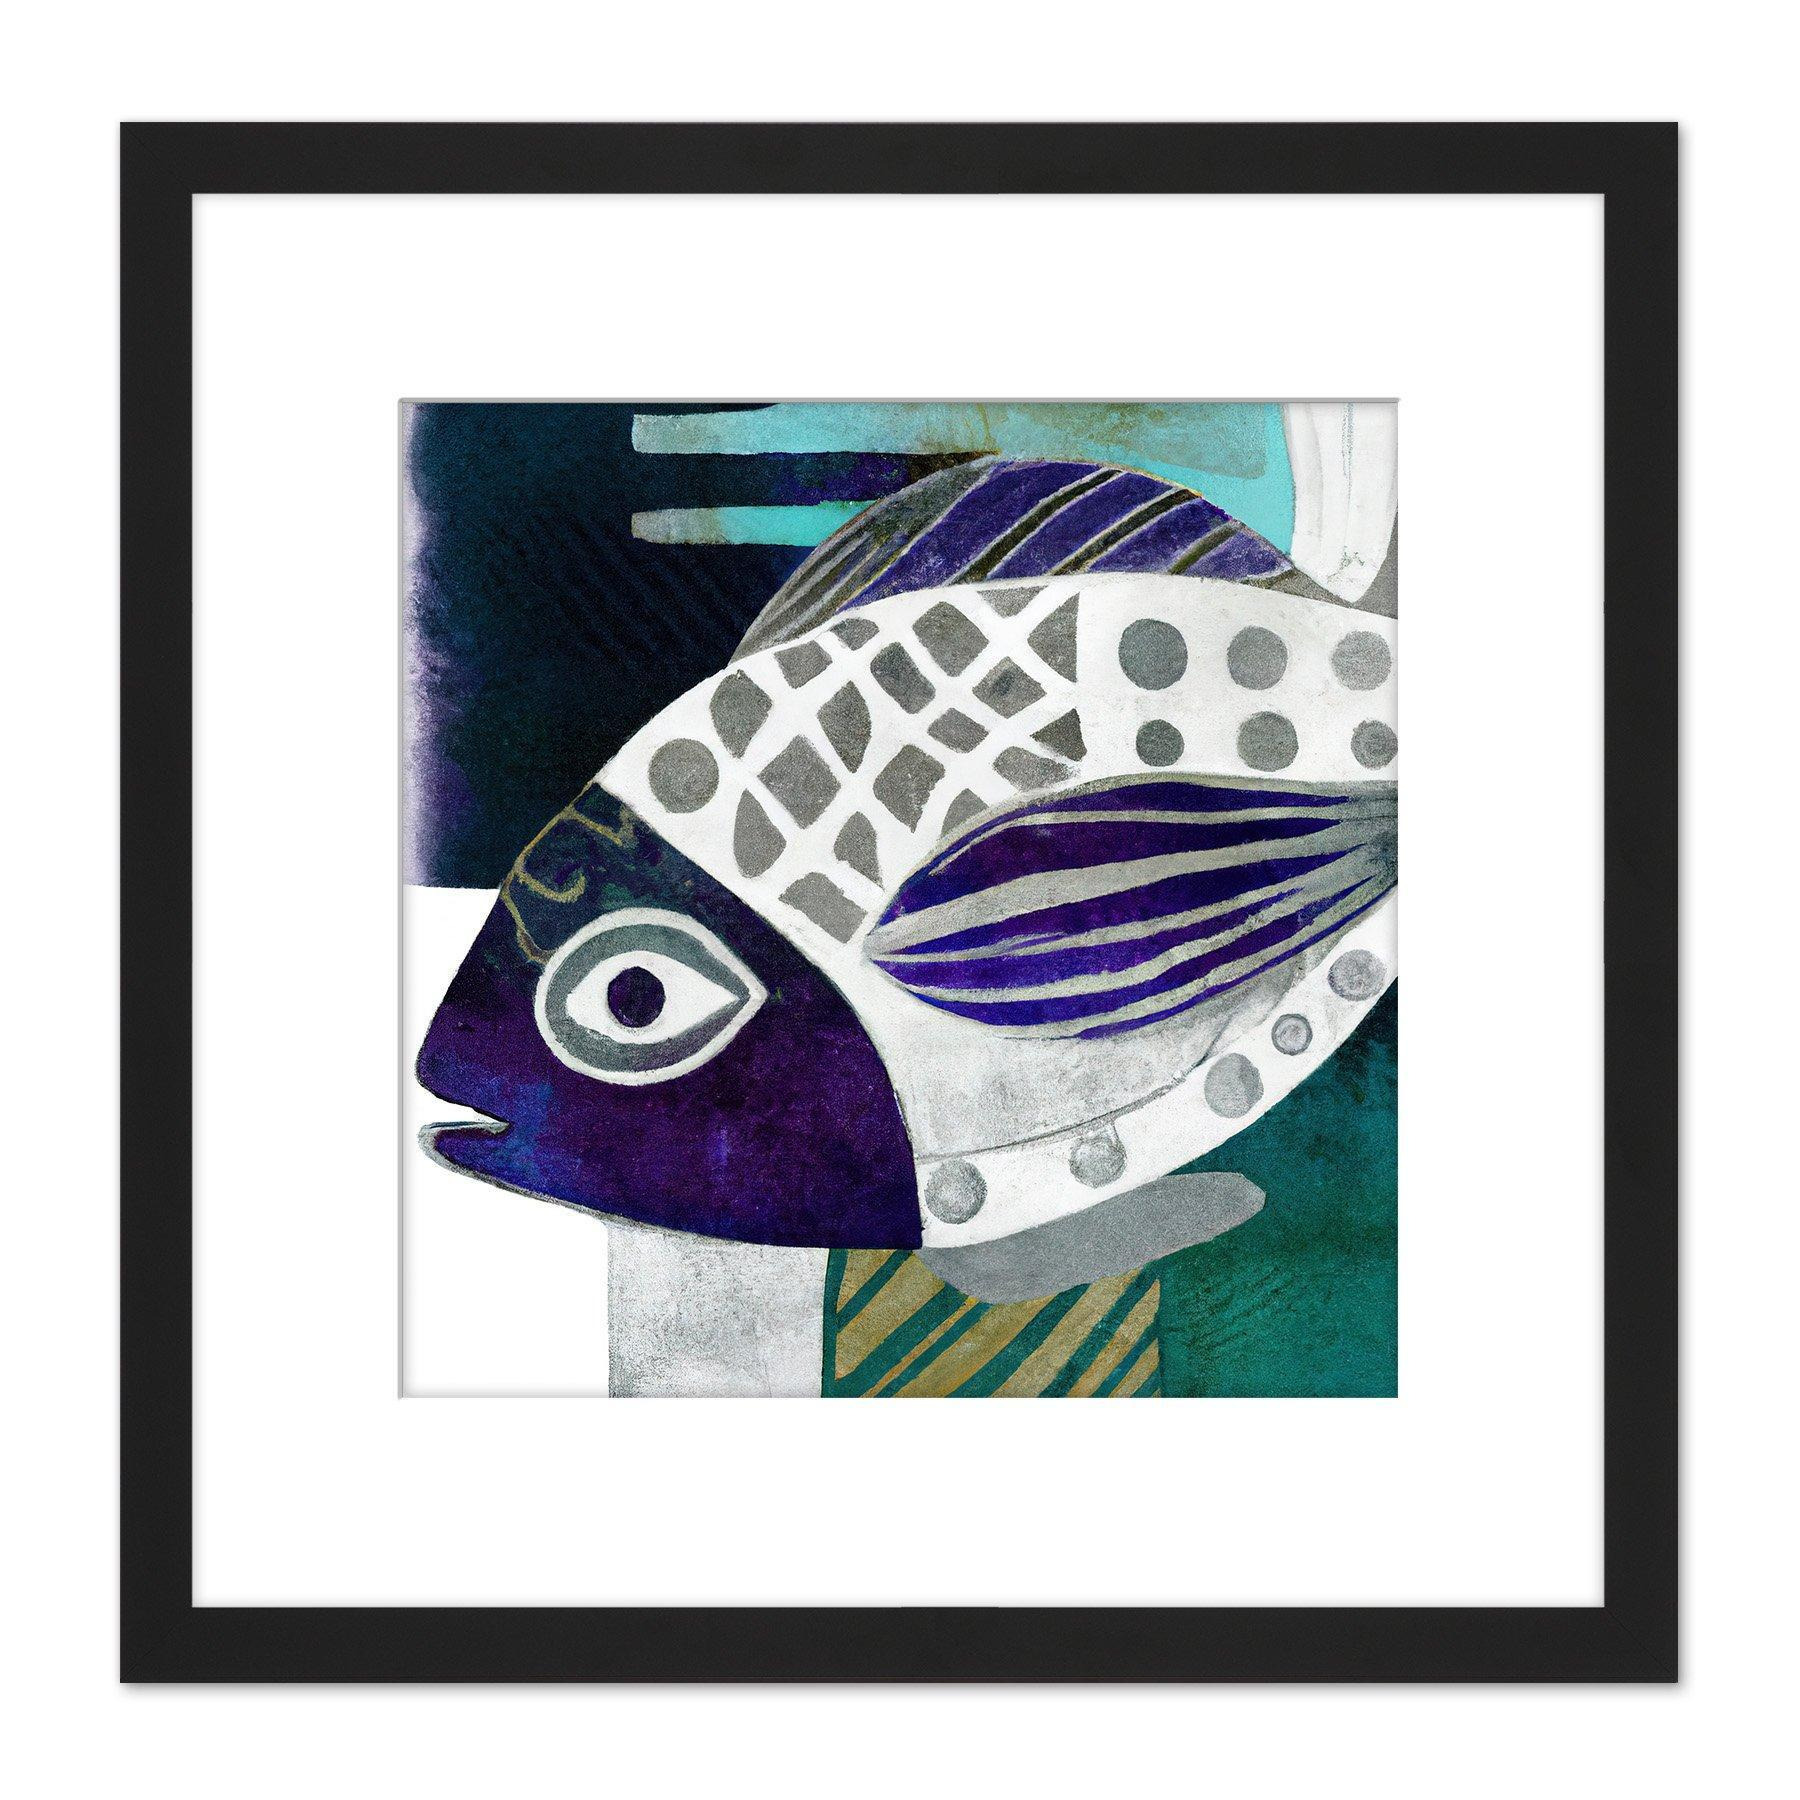 Abstract Fish Watercolour Sketch Illustration Purple Silver Patterns Square Wooden Framed Wall Art Print Picture 8X8 Inch - image 1